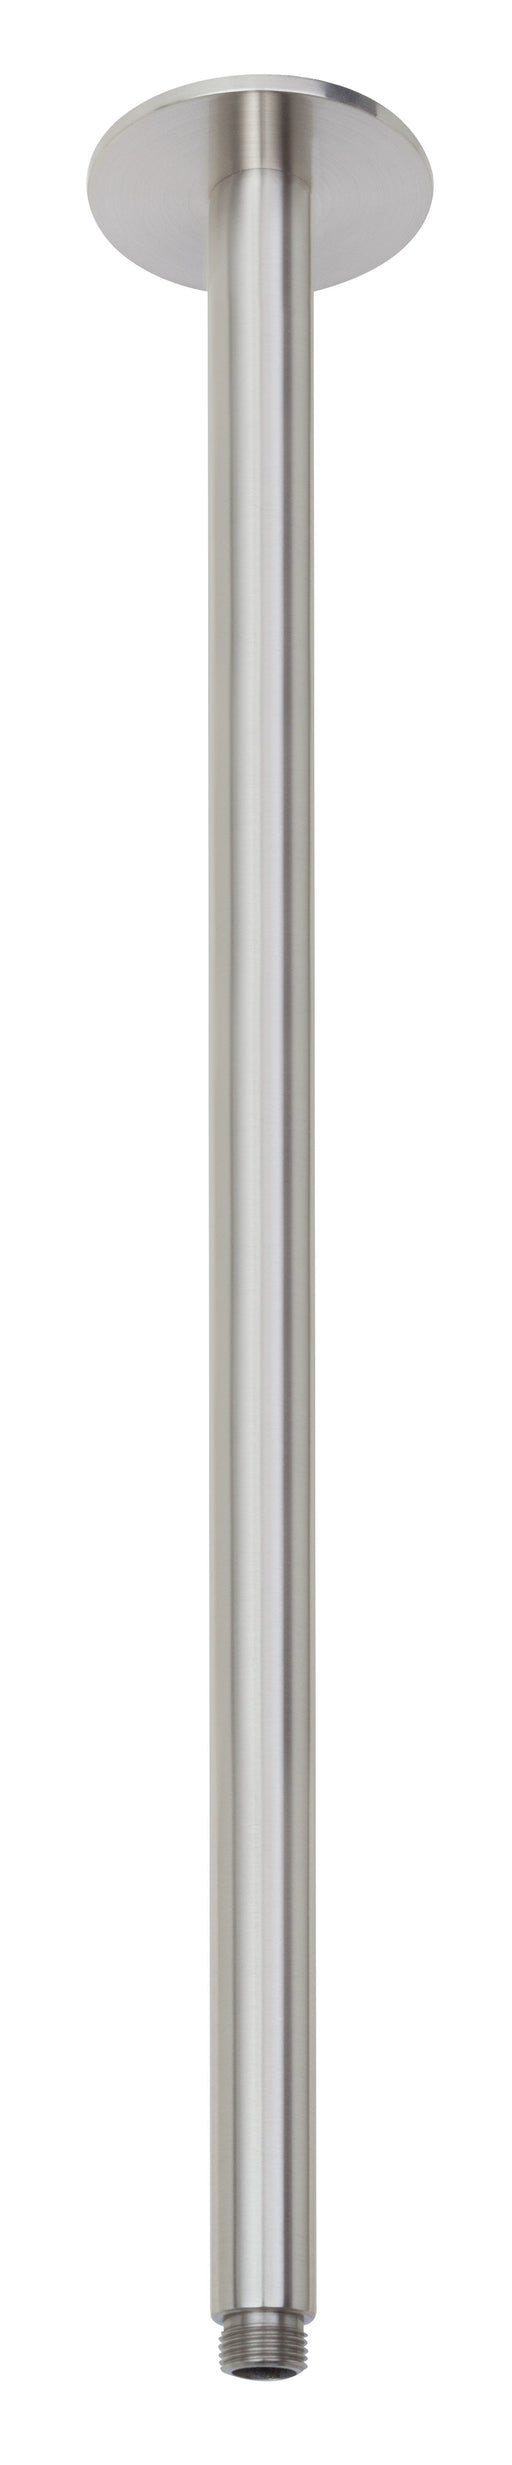 Vivid Ceiling Arm Only 450mm (Brushed Nickel)